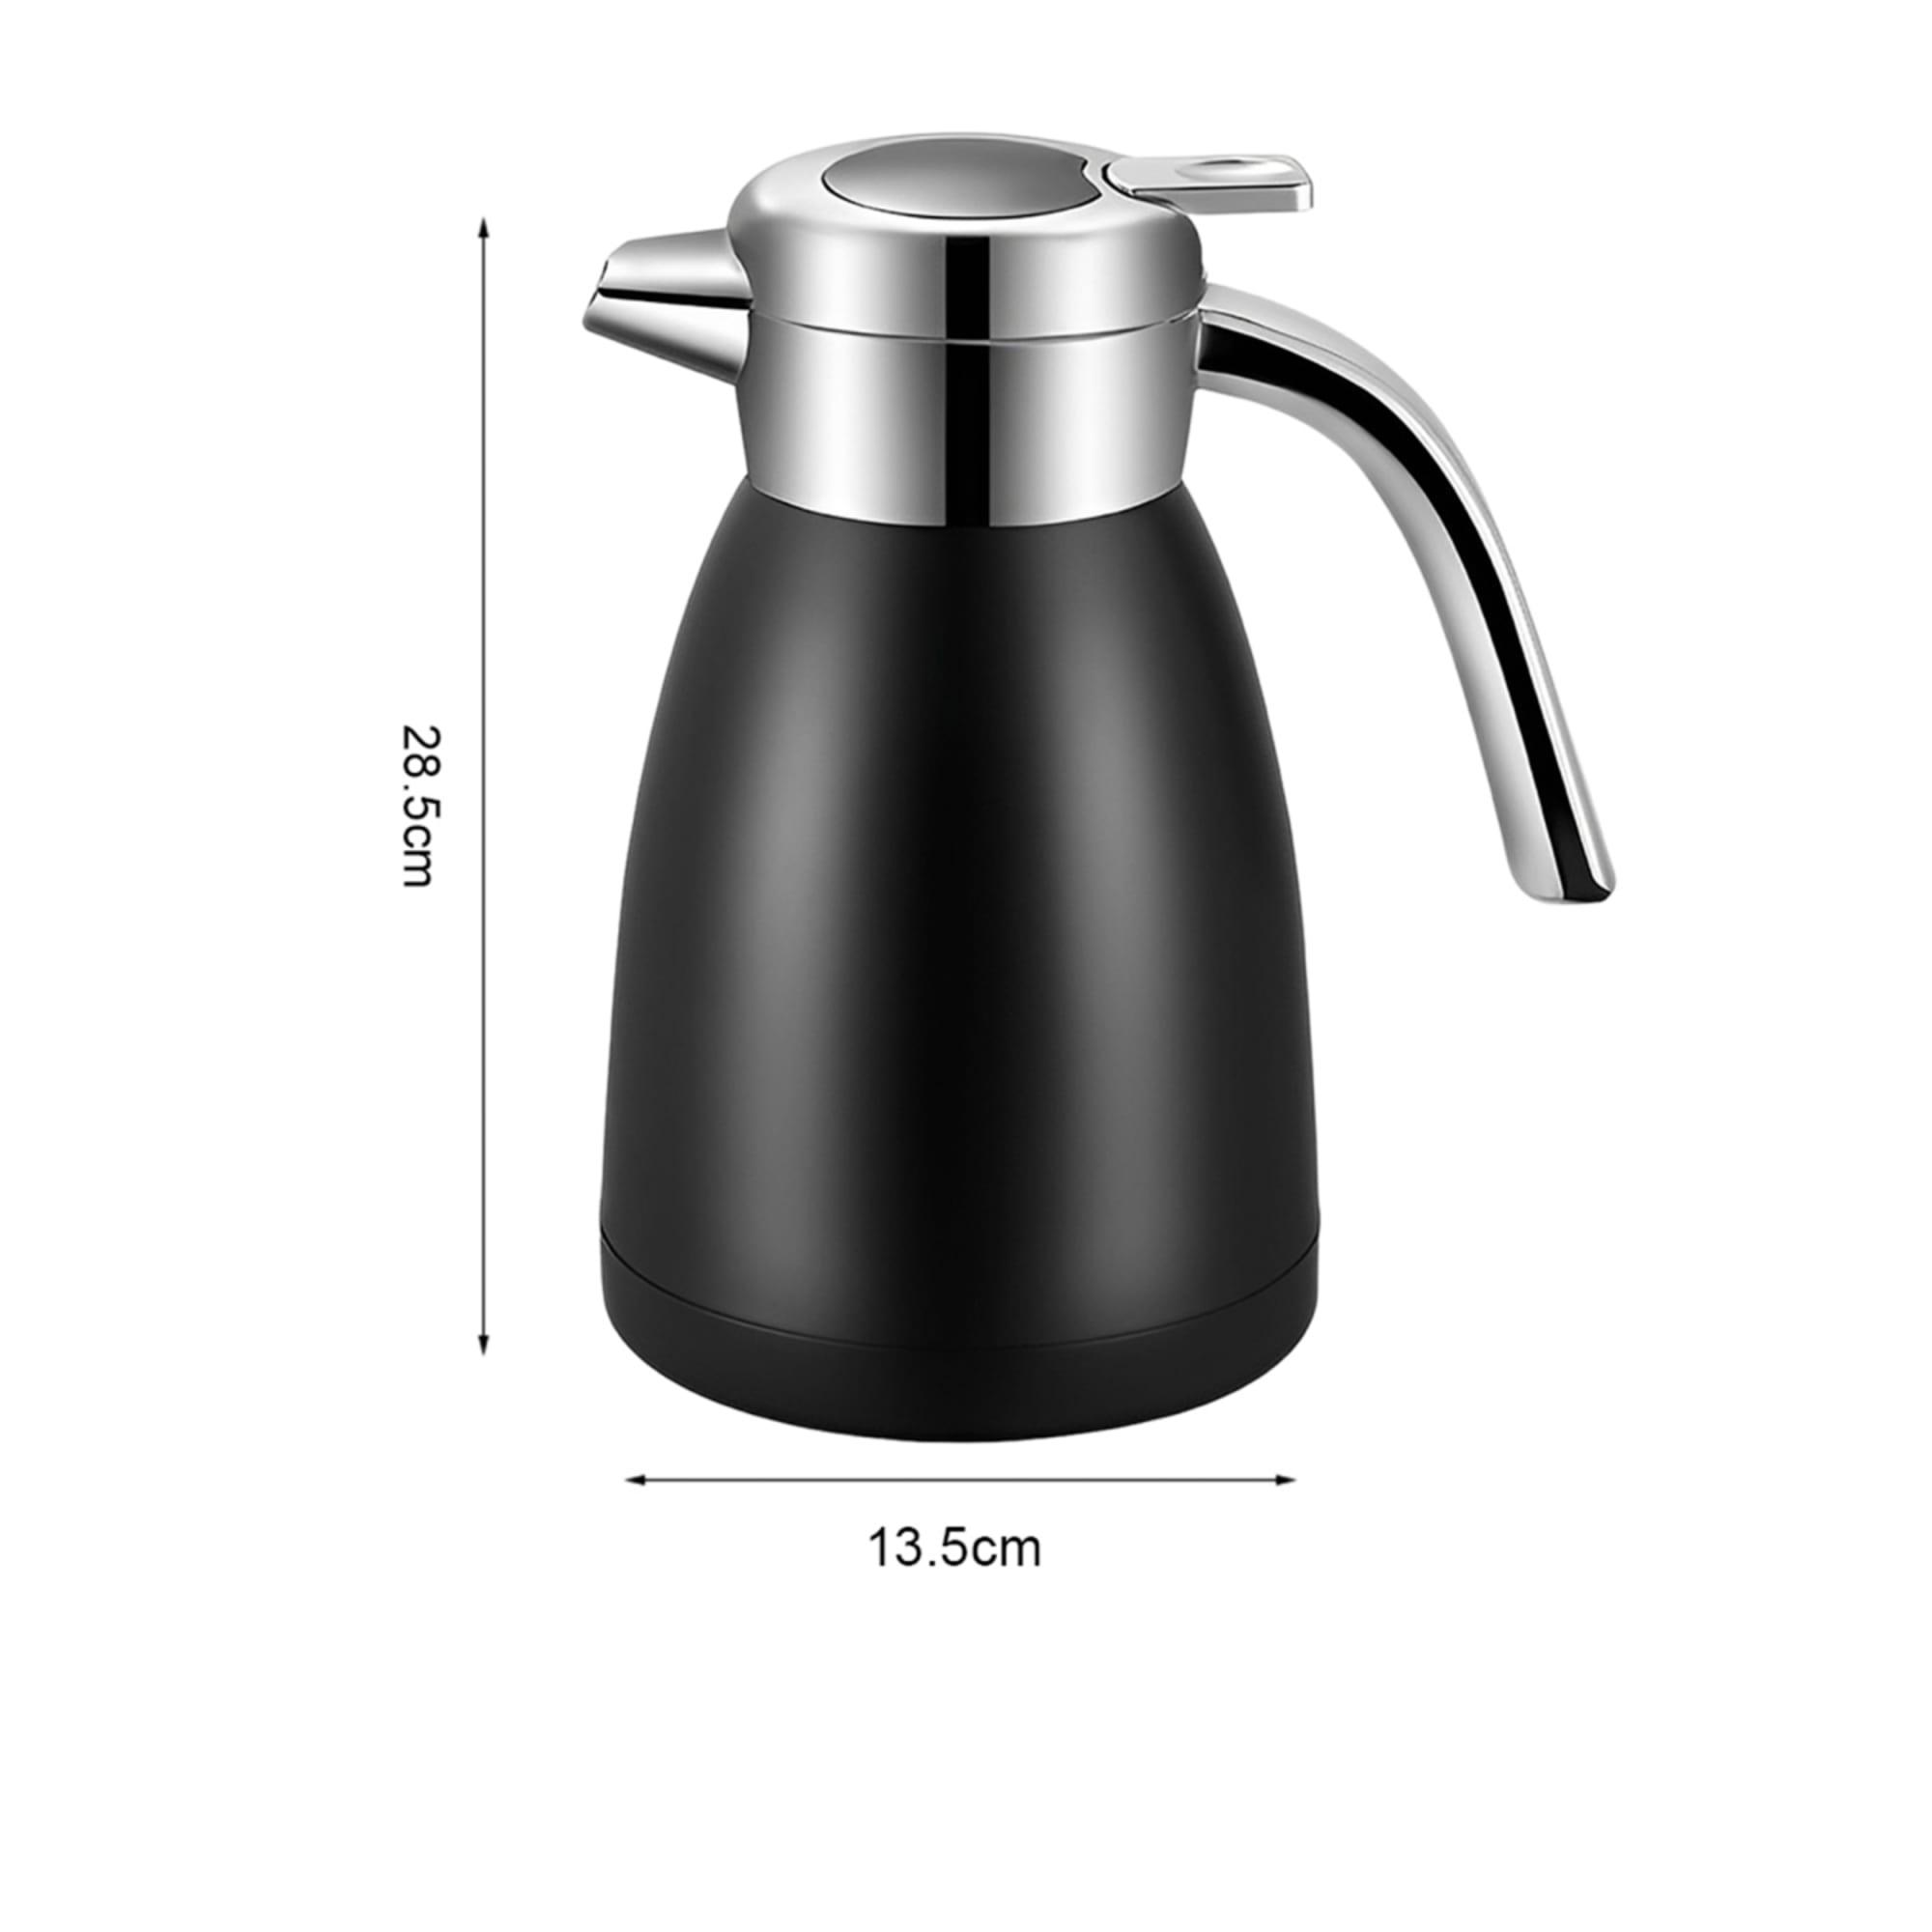 Soga Stainless Steel Insulated Kettle 2.2L Black Image 7